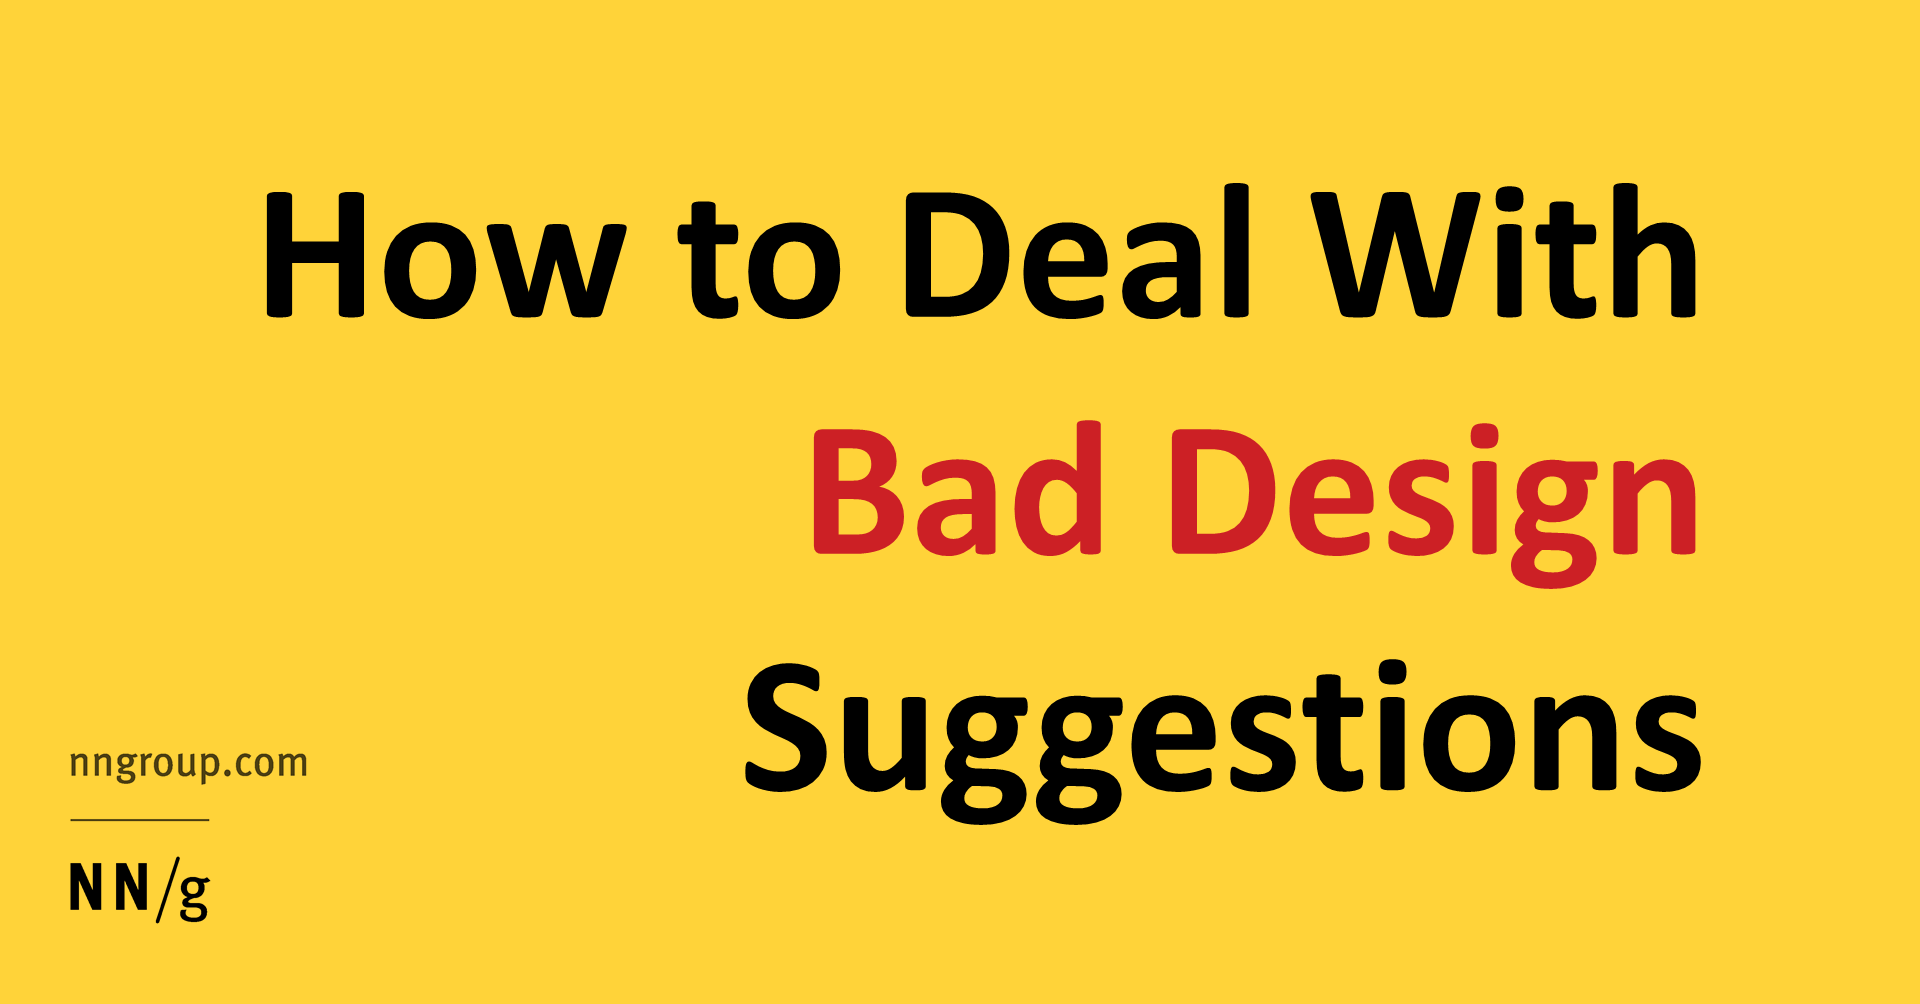 How to Deal With Bad Design Suggestions